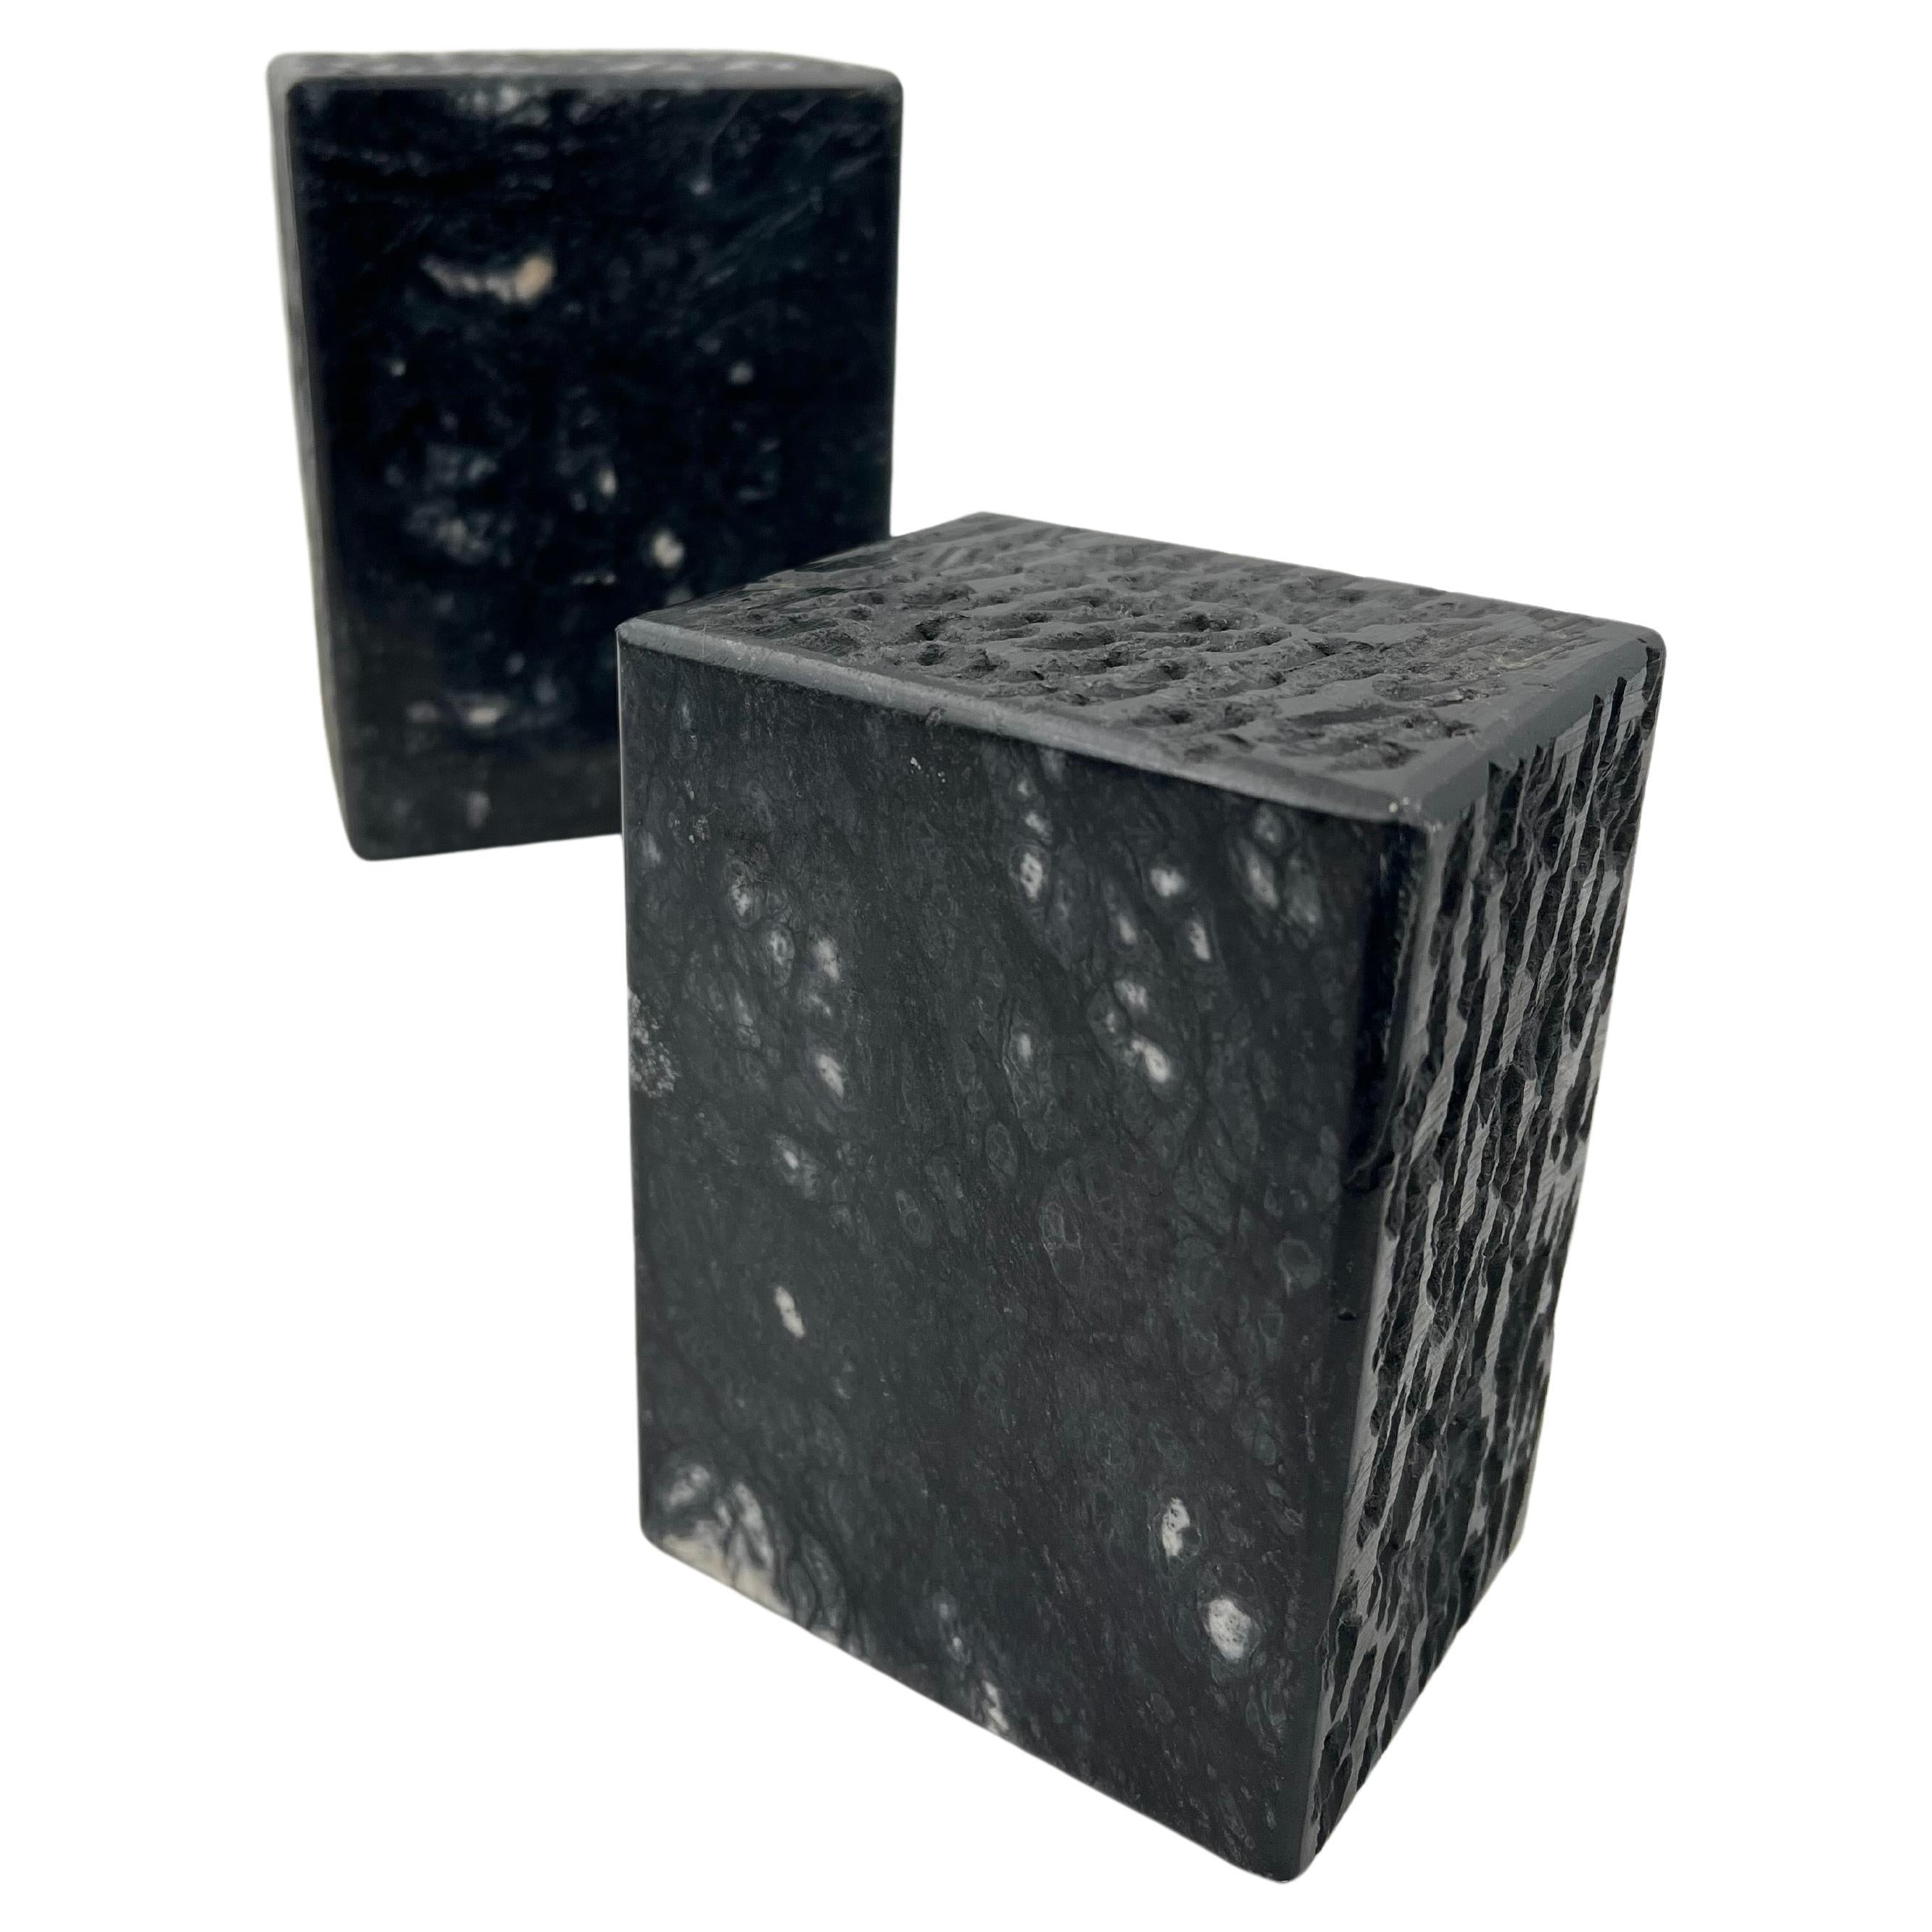 Pair of solid marble block bookends circa 1980s made in Italy with 4 sides textured finish and one side polished, in black marble.